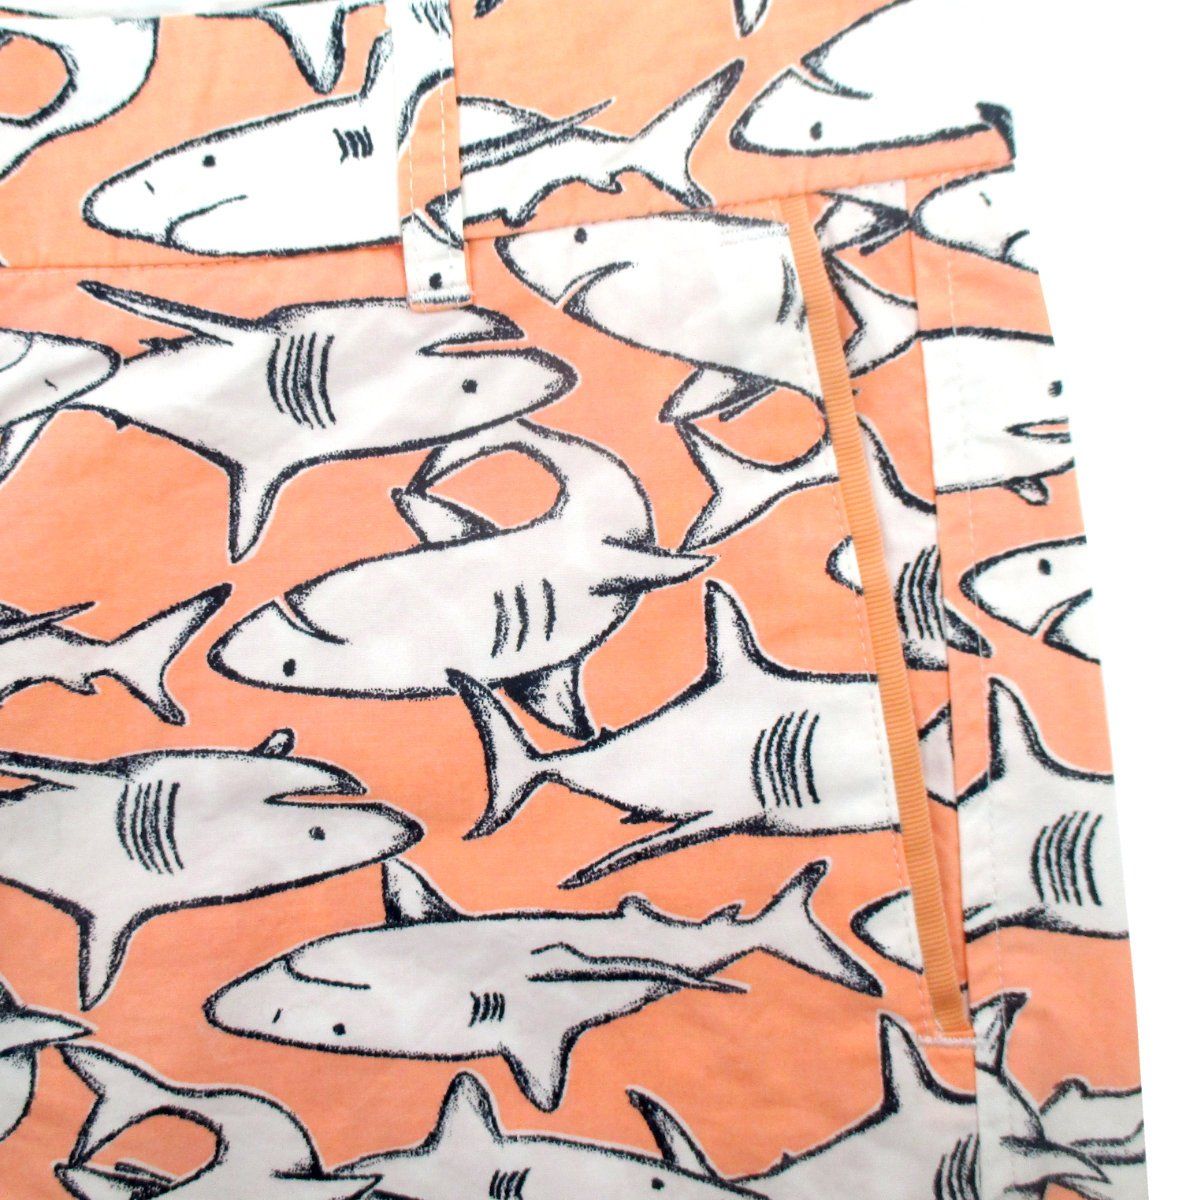 Colorful Shark All Over Print Flat Front Chinos for Women in Orange